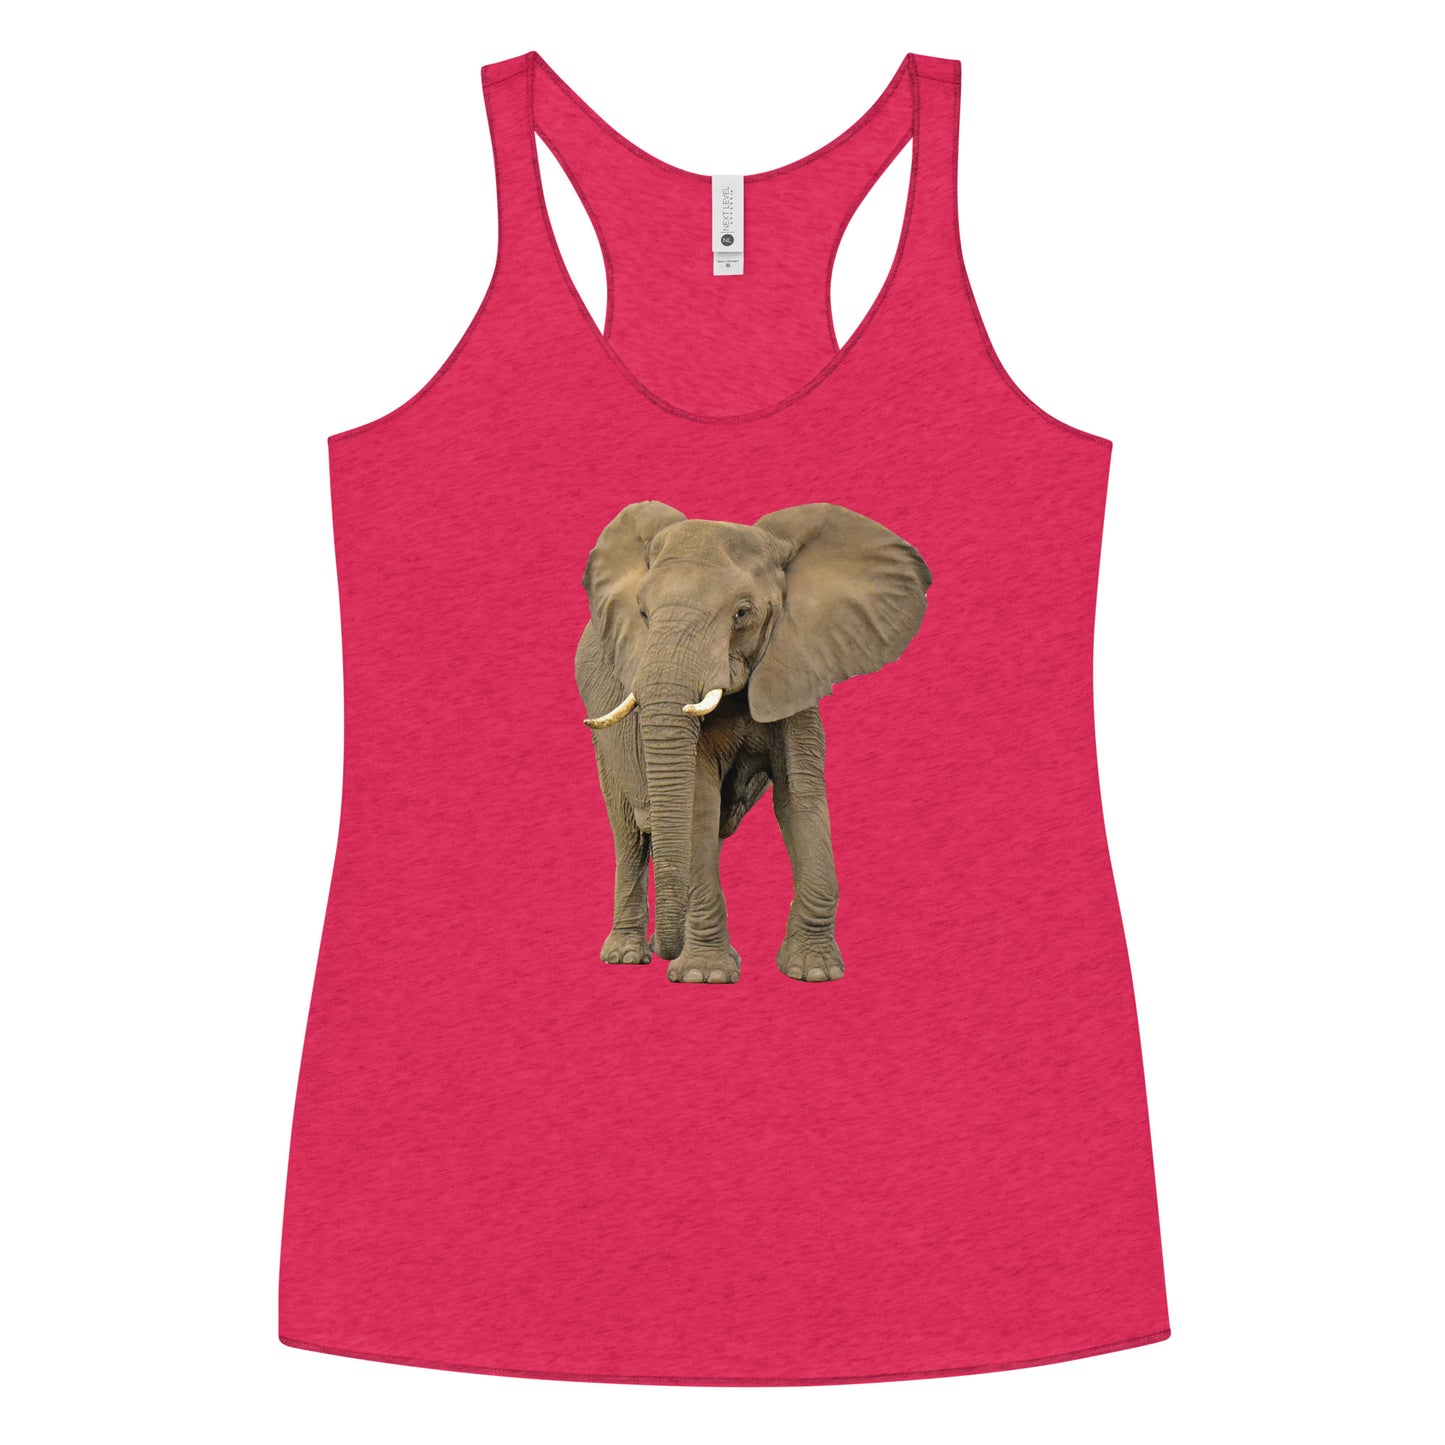 Womens Racerback Tank Top Printed with an African Bull Elephant.